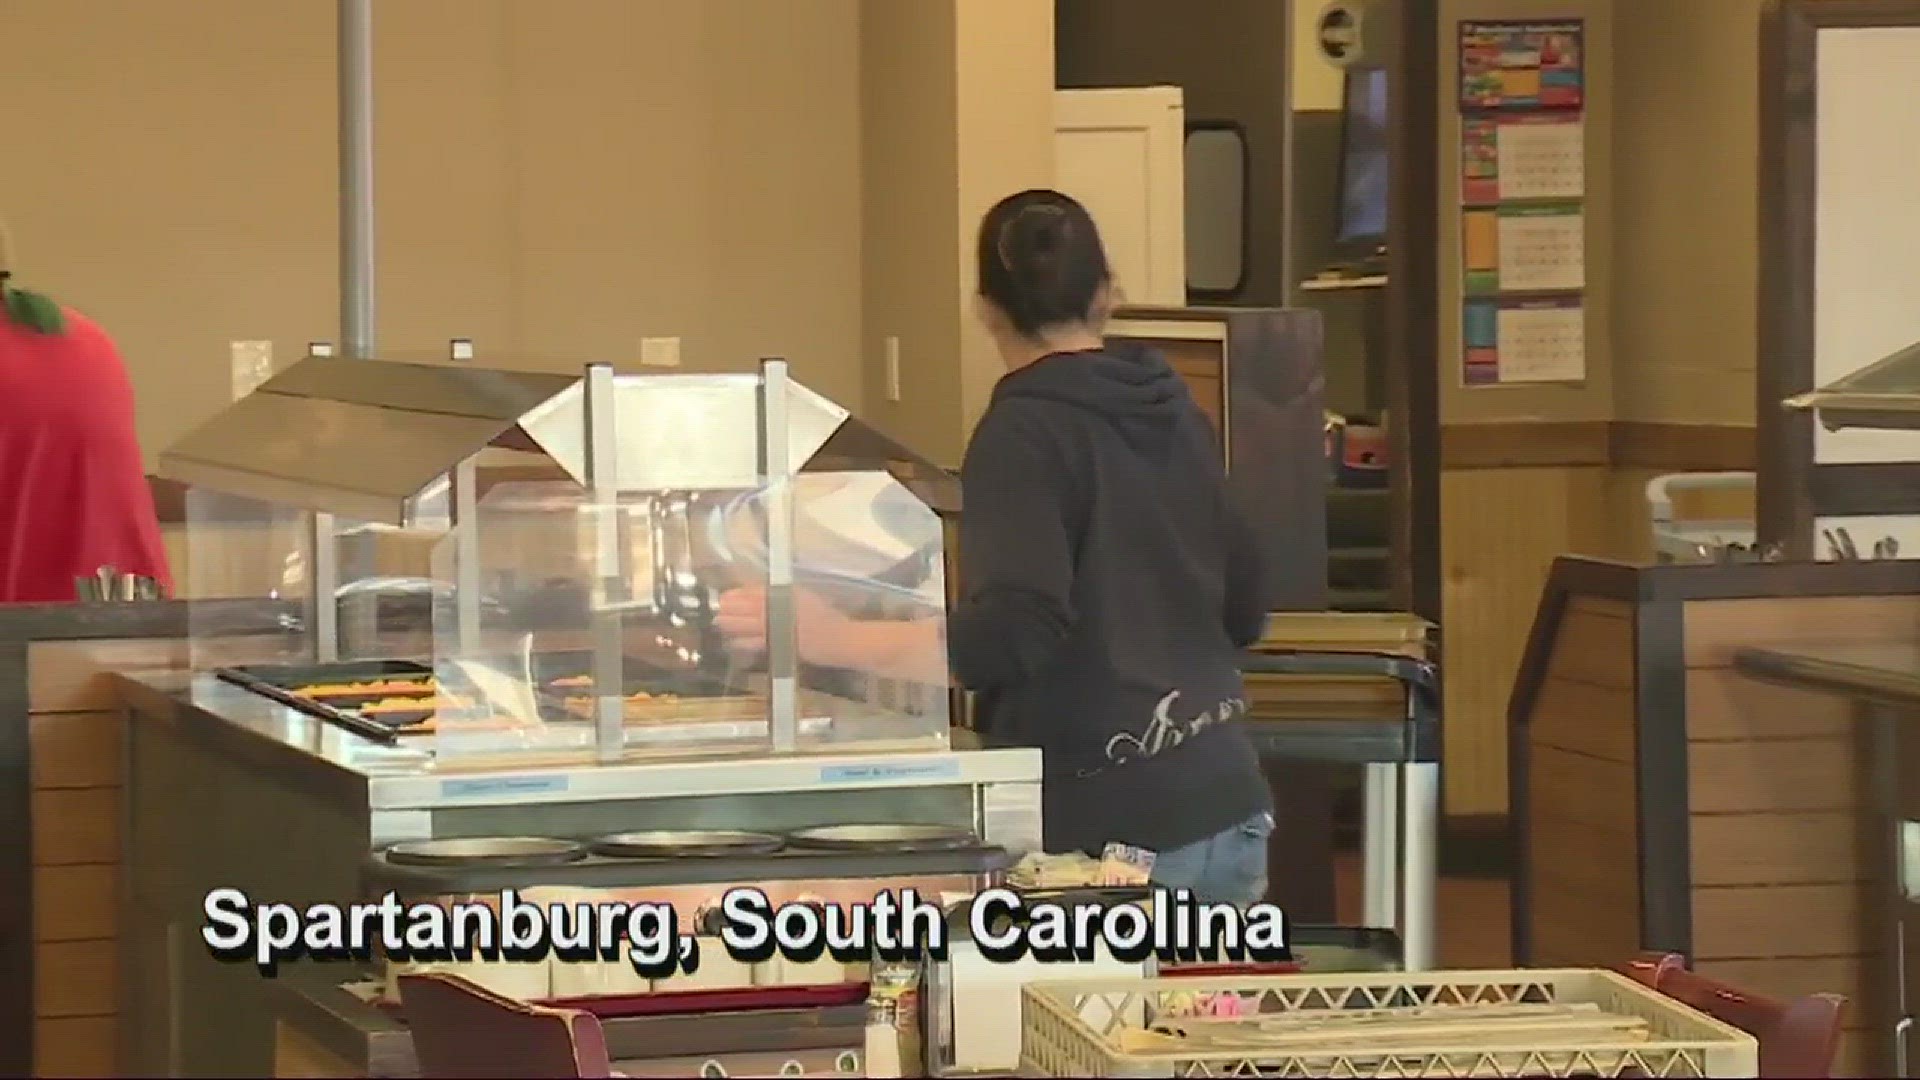 South Carolina restaurant owners say their own language barrier contributed to a Help Wanted sign that included the phrase "minorities need not apply" in both English and Spanish.